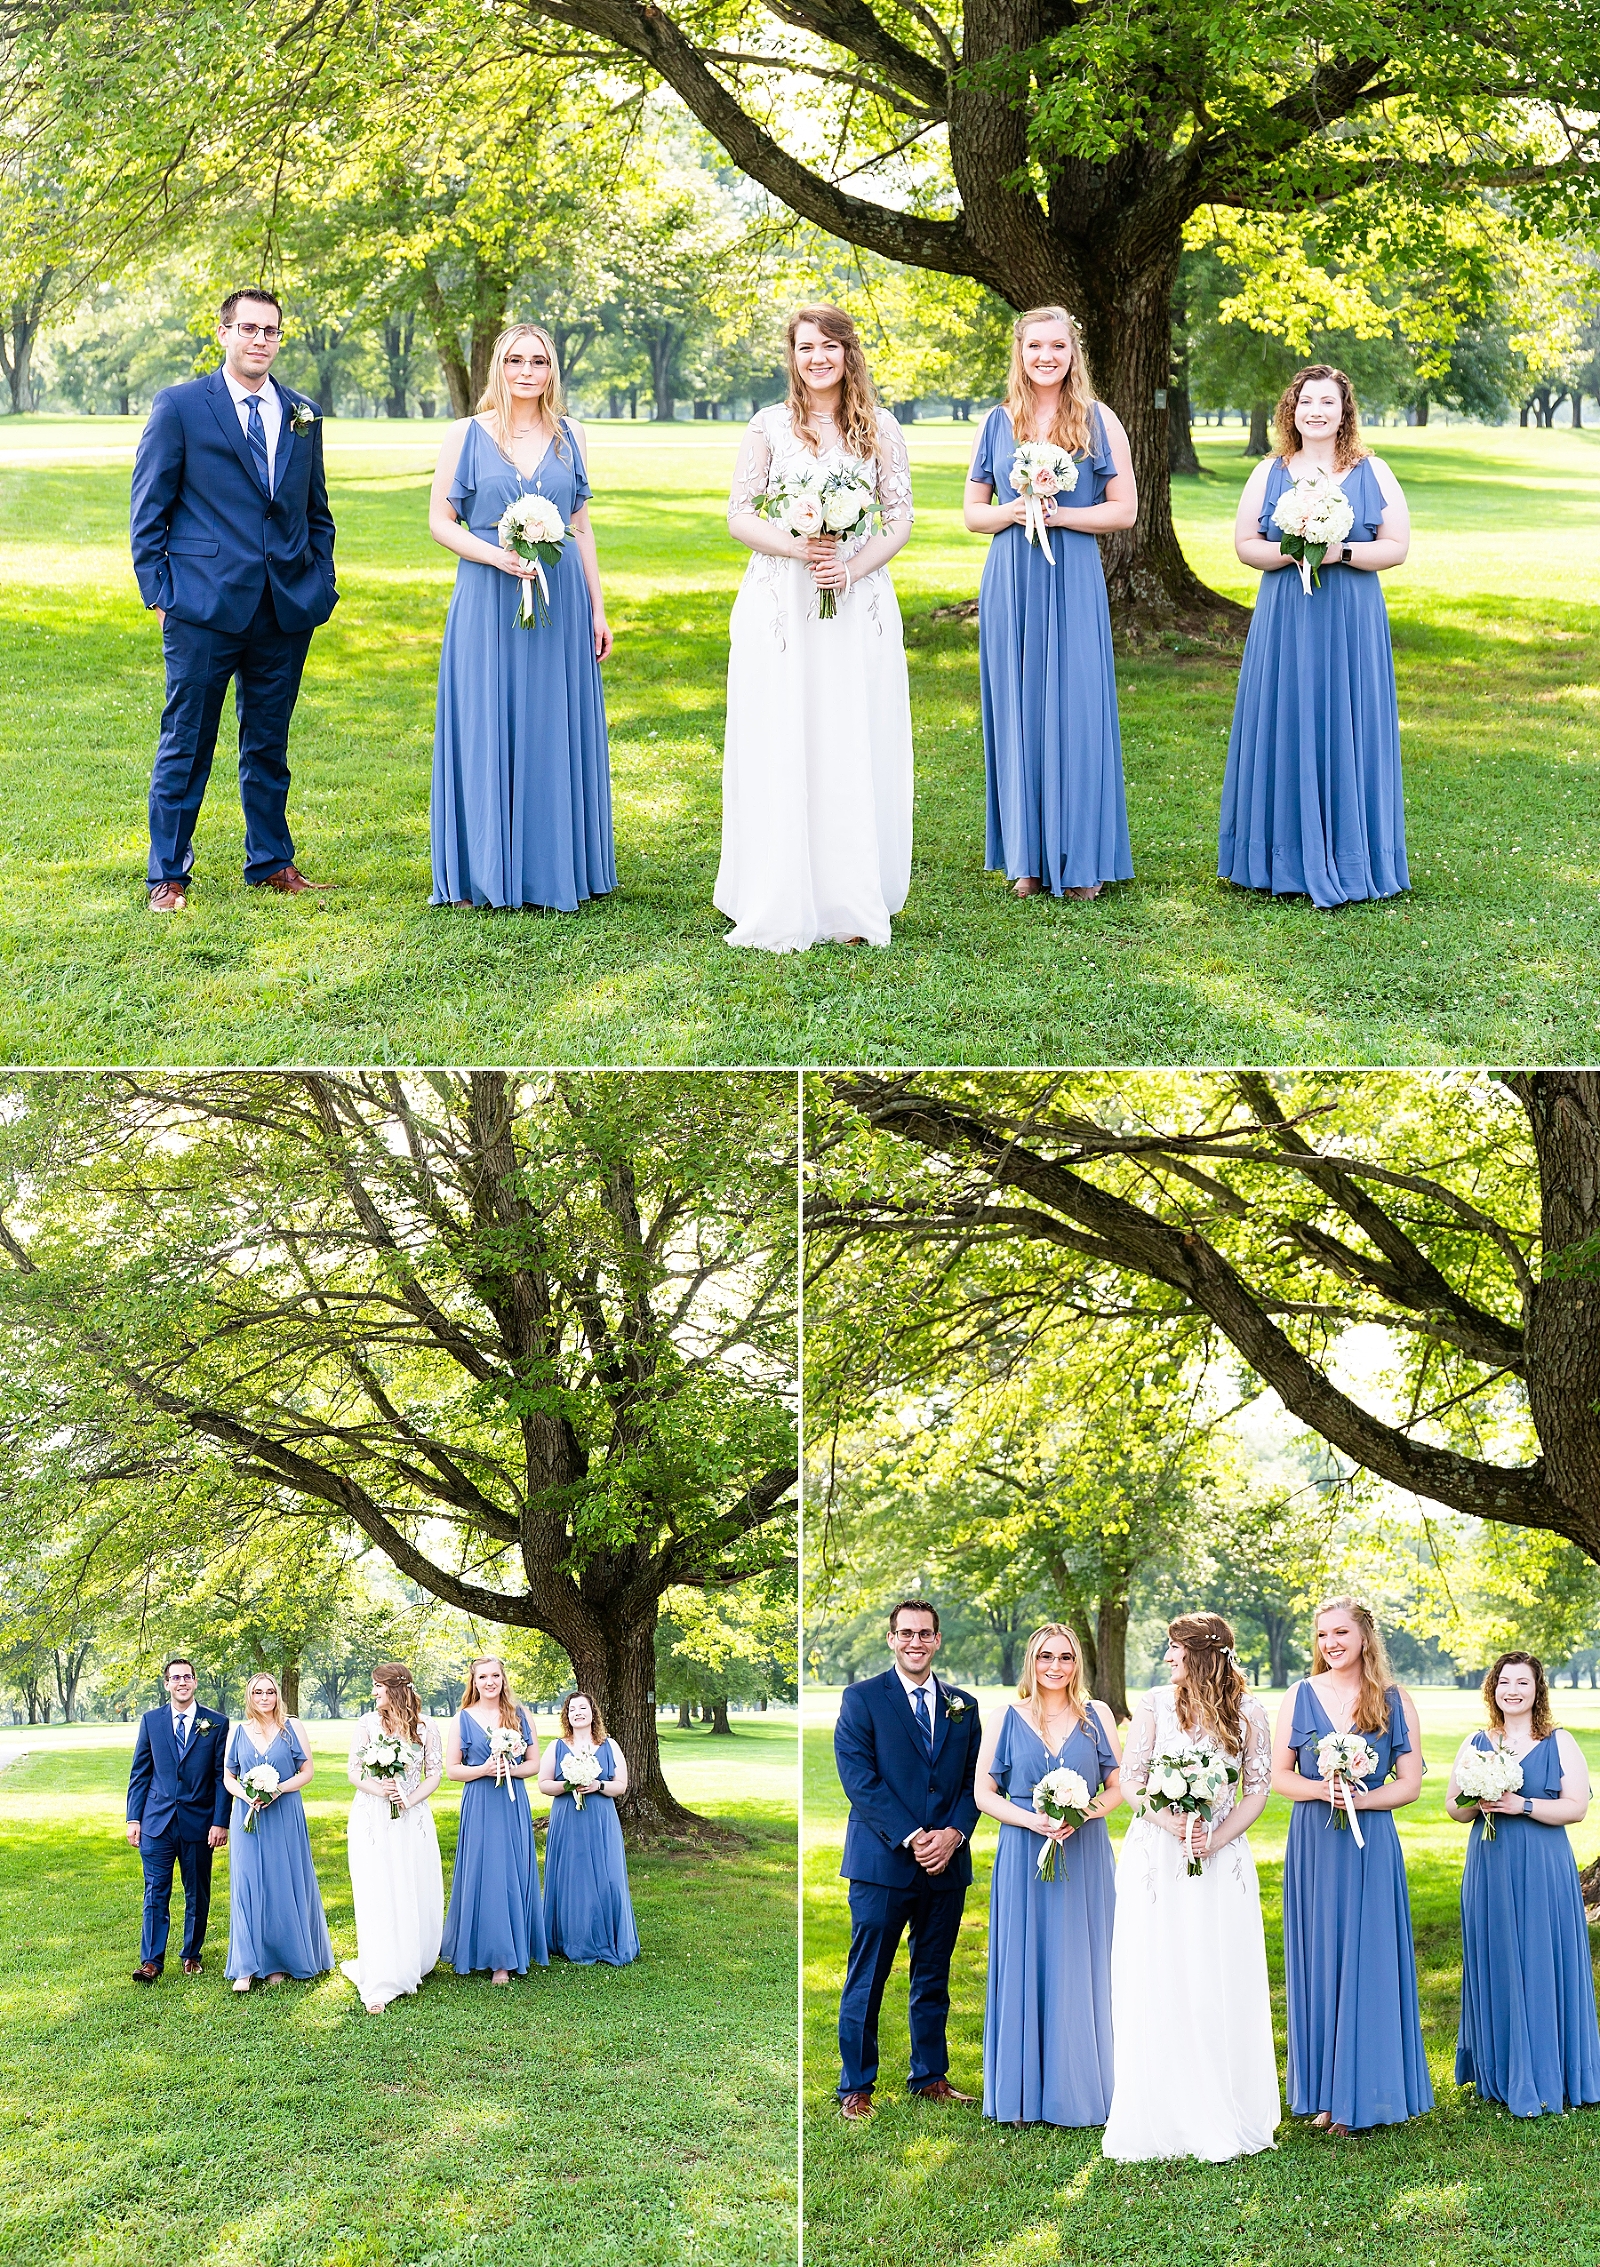 This Woodlands at Algonkian wedding in Sterling, Virginia was just GORGEOUS!! Their day was full of beautiful lighting, gold accent decorations, yummy food and desserts, and handmade wedding dresses and florals! To view the full wedding, click: https://bethanievetter.com/hannah-michael-woodlands-at-algonkian-wedding. Complete with blue suits, a handmade wedding dress, stunning flower arrangements. Photographed by Bethanie Vetter Photography LLC. #WoodlandsAtAlgonkian #WoodlandsAtAlgonkianWedding #TheWoodlandsAtAlgonkian #SummerWedding #August #WeddingPhotos #WeddingPhotography #BethanieVetterWeddings